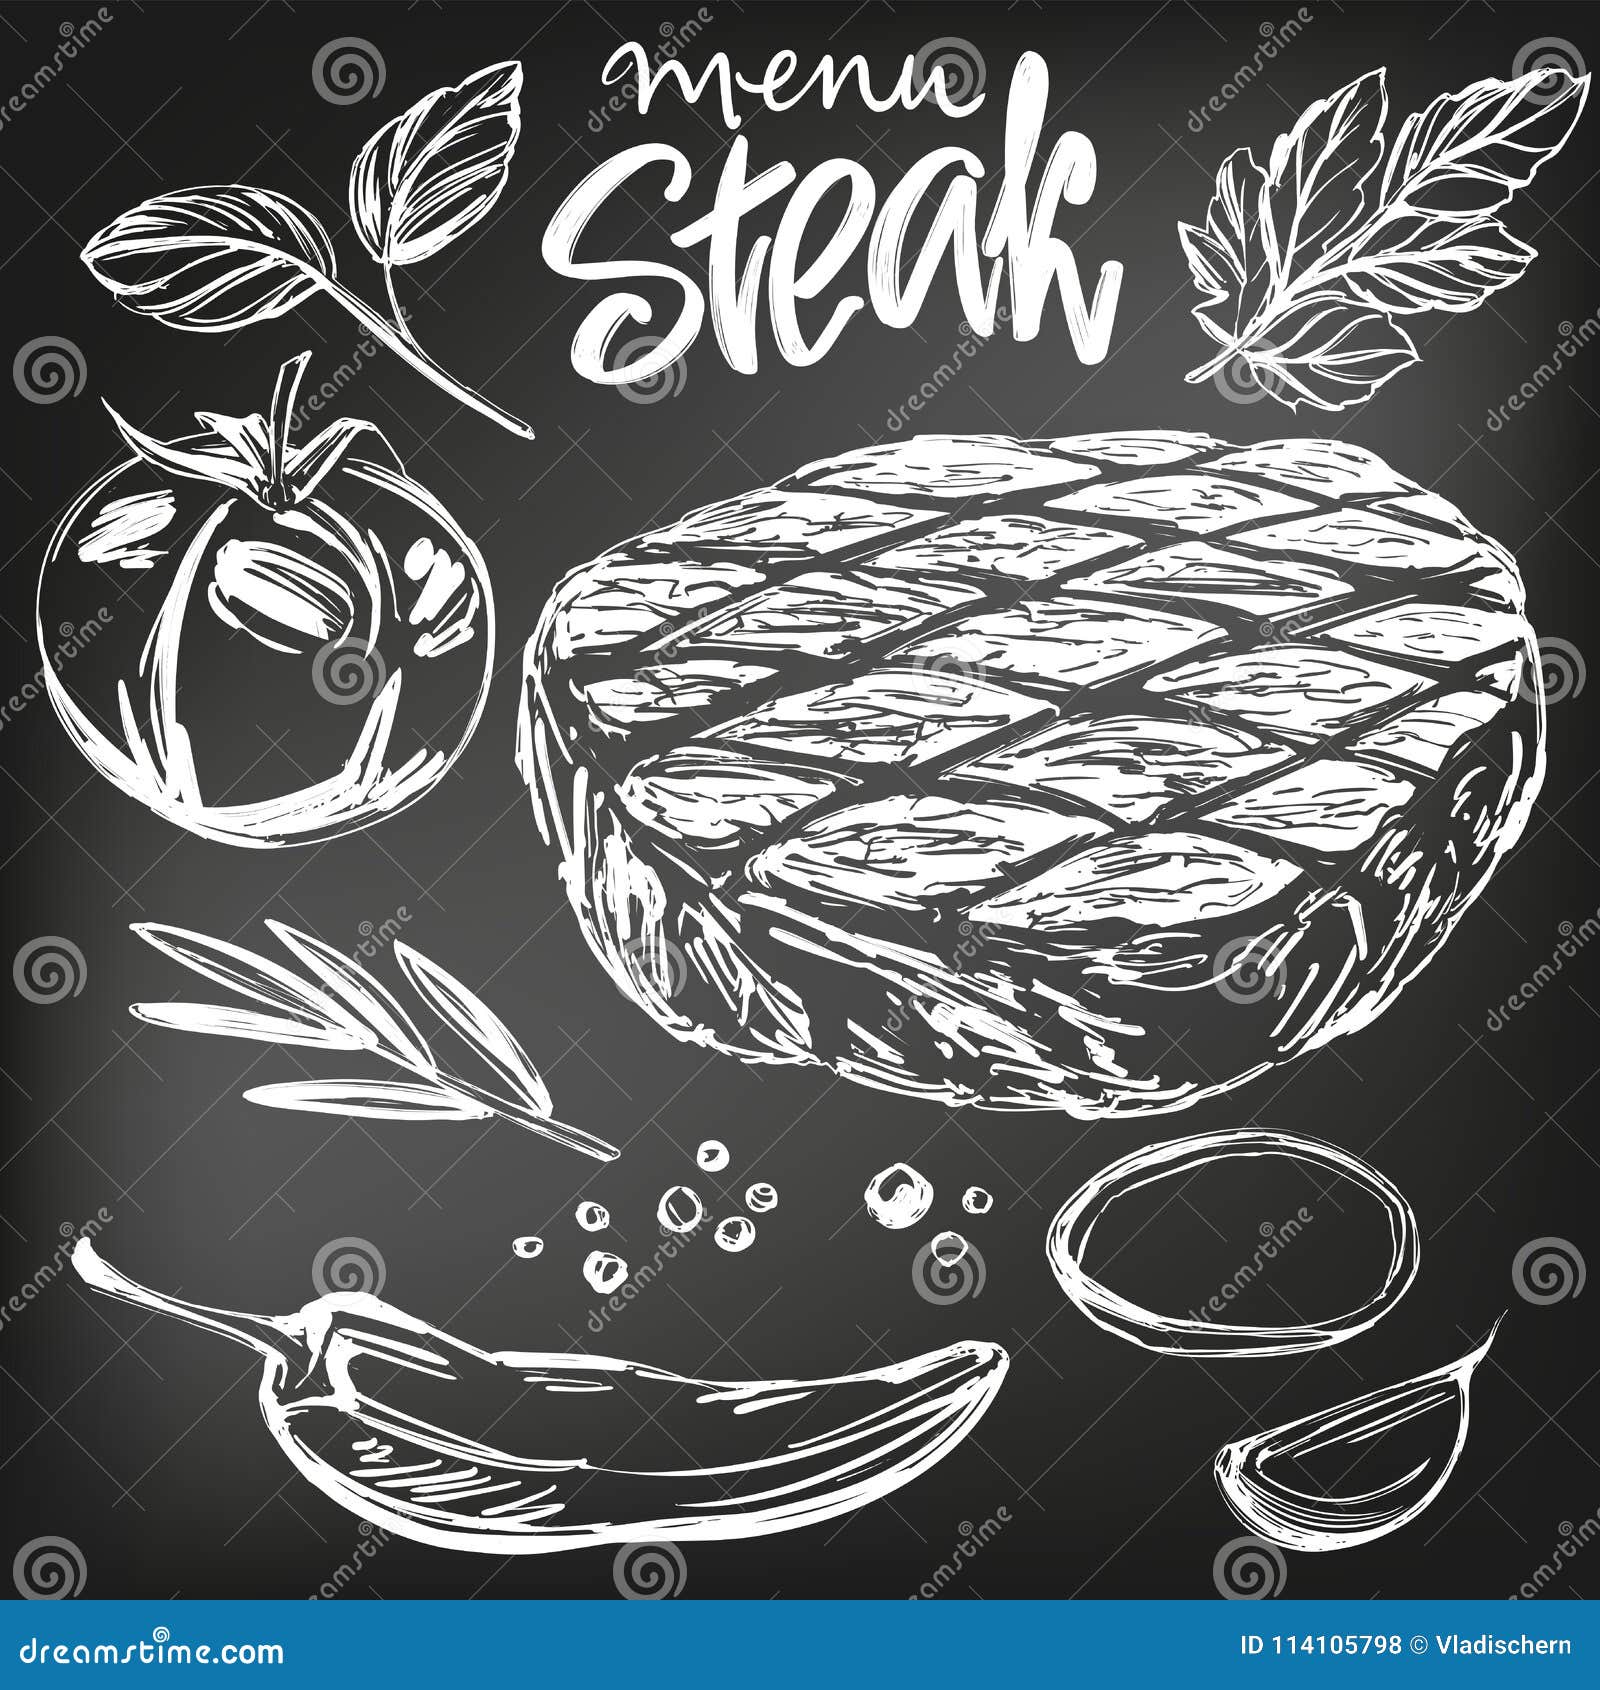 Image Details IST_24582_03973 - Sketch steak. Hand drawn beef food,  engraving bbq meat strip, club and ribeye steaks vector set. Grilled  products for restaurant menu as filet mignon, porter house, chateaubrian and